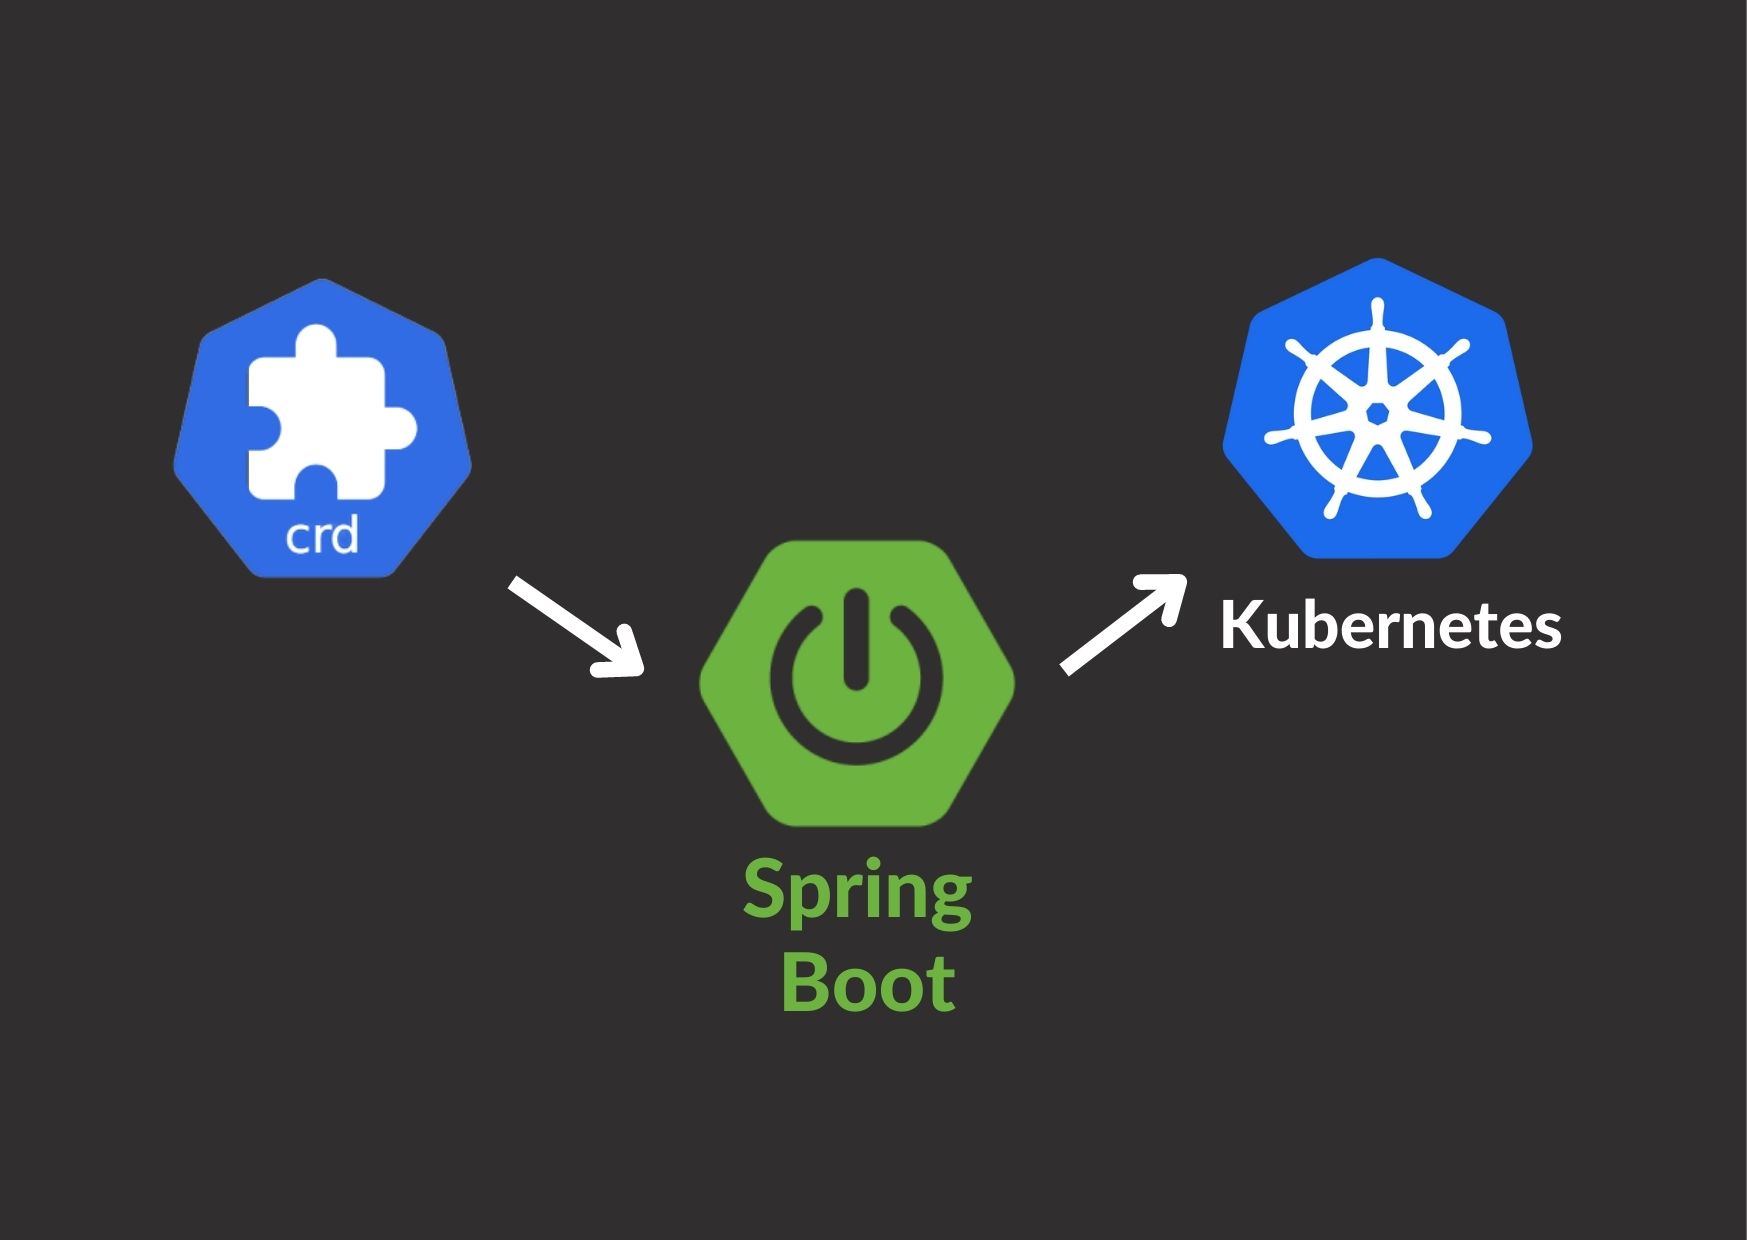 Part 2: How to Create a Spring Boot Kubernetes Controller